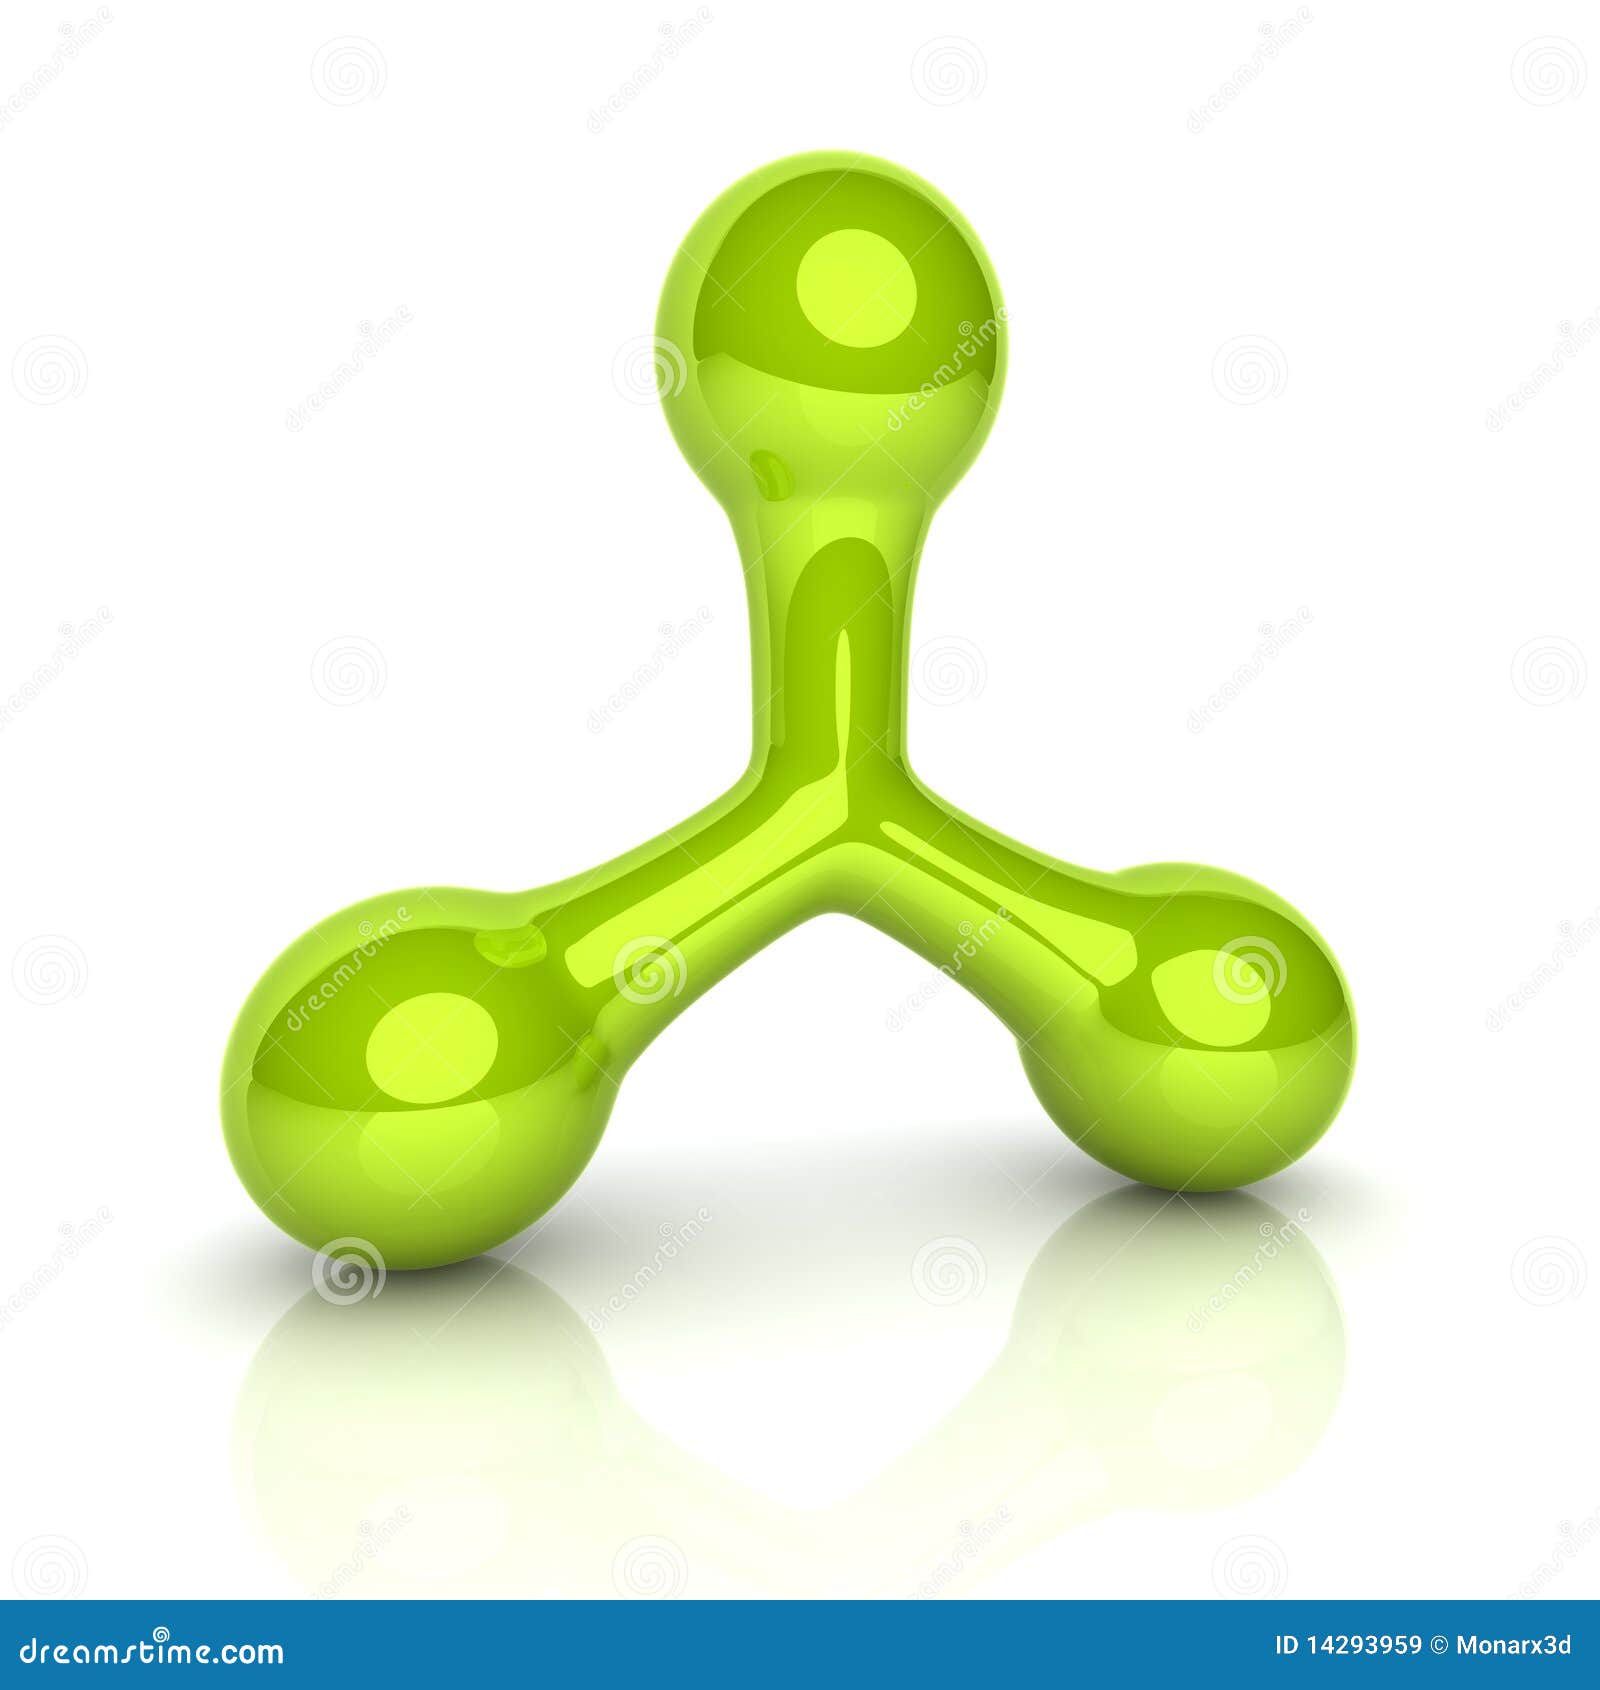 smooth objects clipart - photo #32